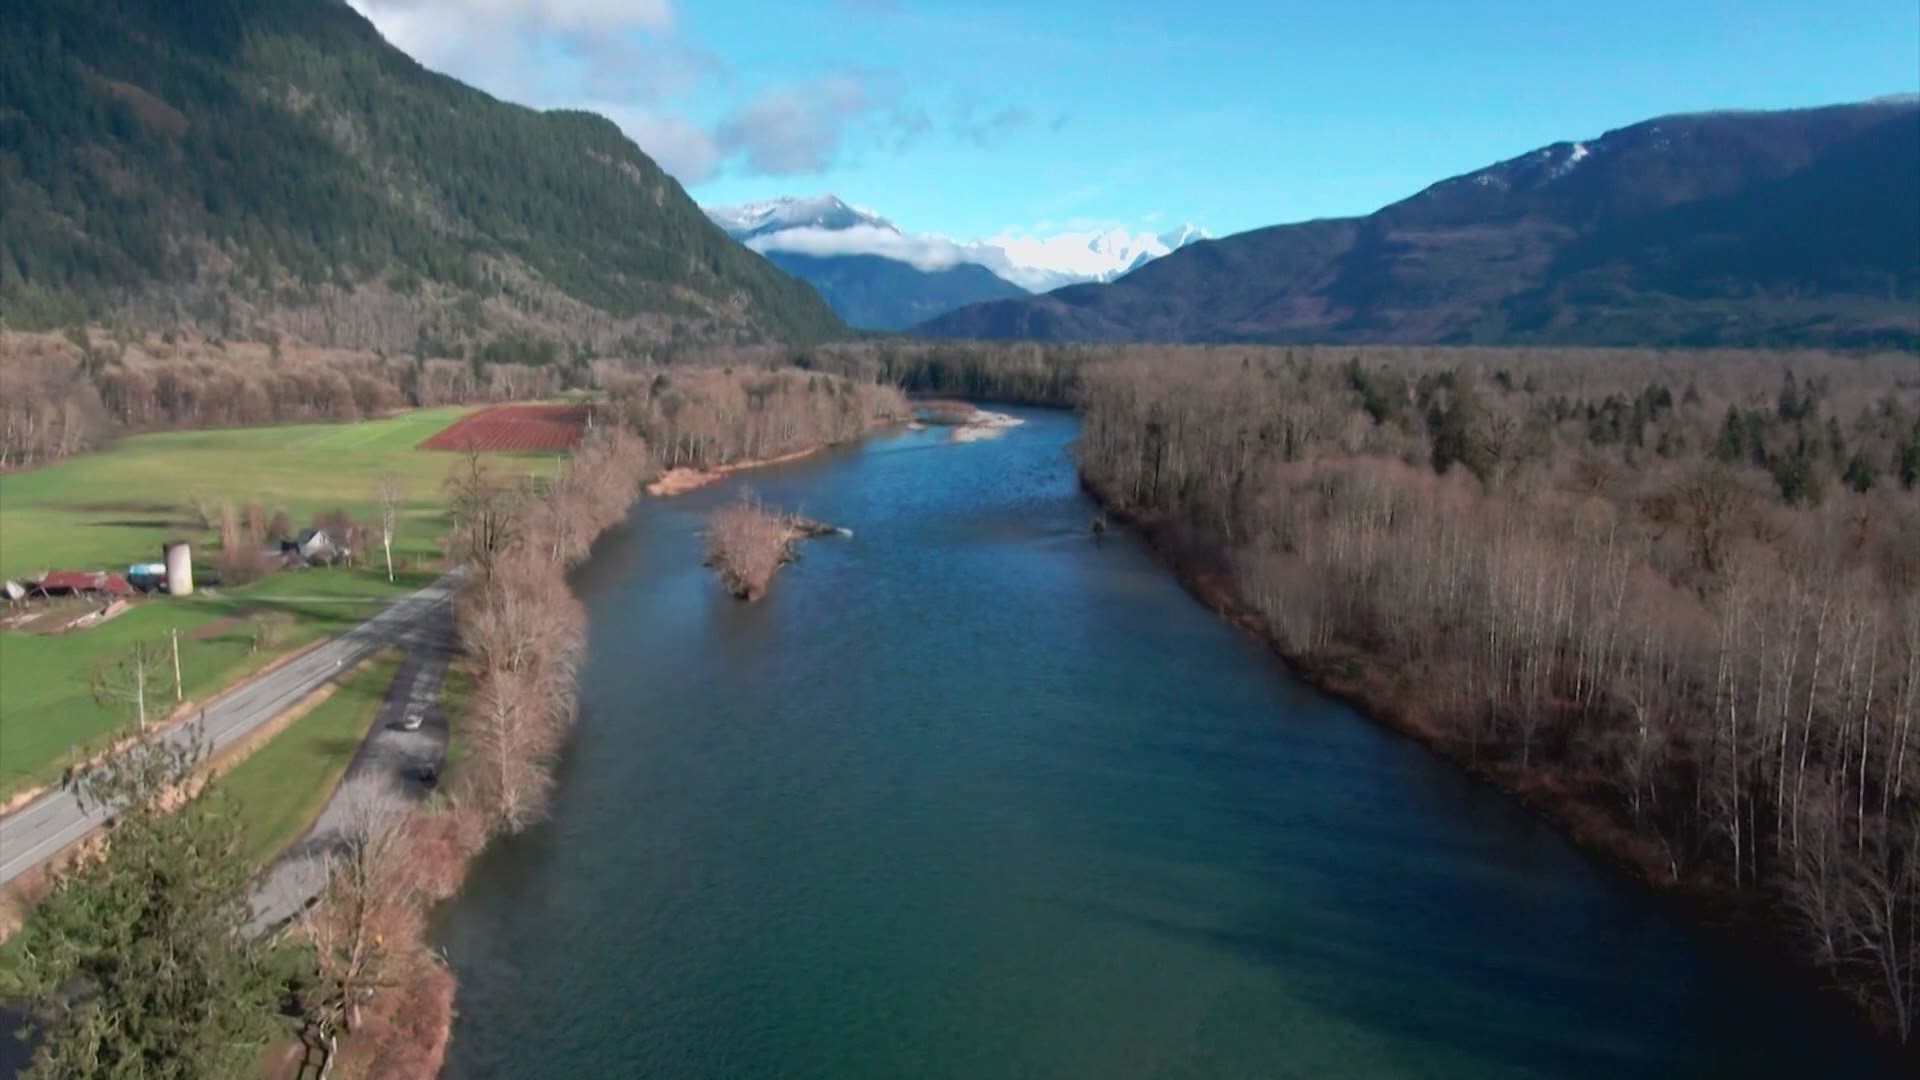 KING 5 Investigators say Seattle City Light left outdated messages on its website about "healthy salmon populations" on the Skagit that didn't tell the whole story.